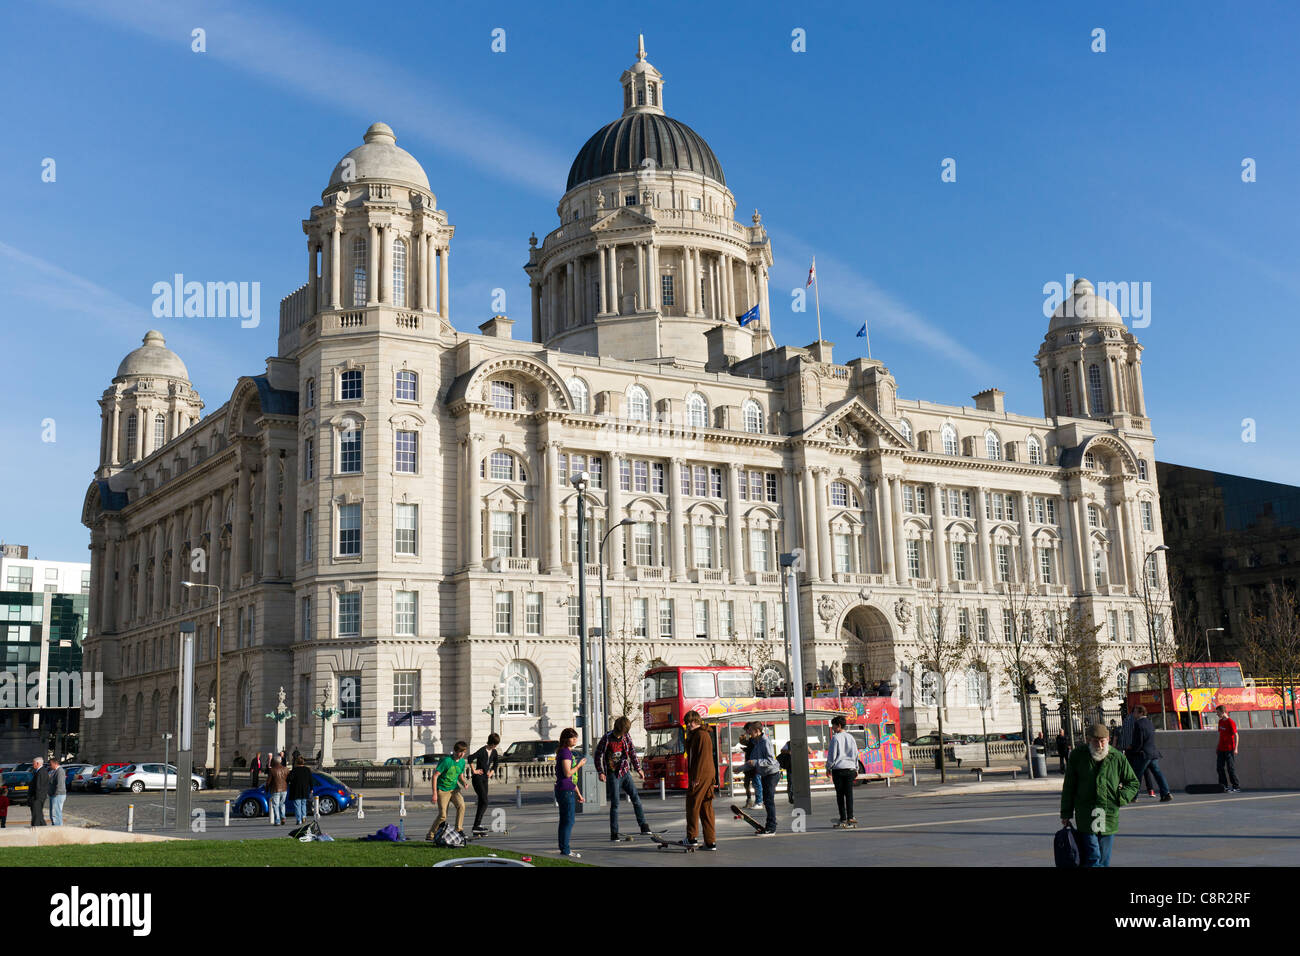 The Three Graces of the world famous Liverpool Waterfront. Stock Photo